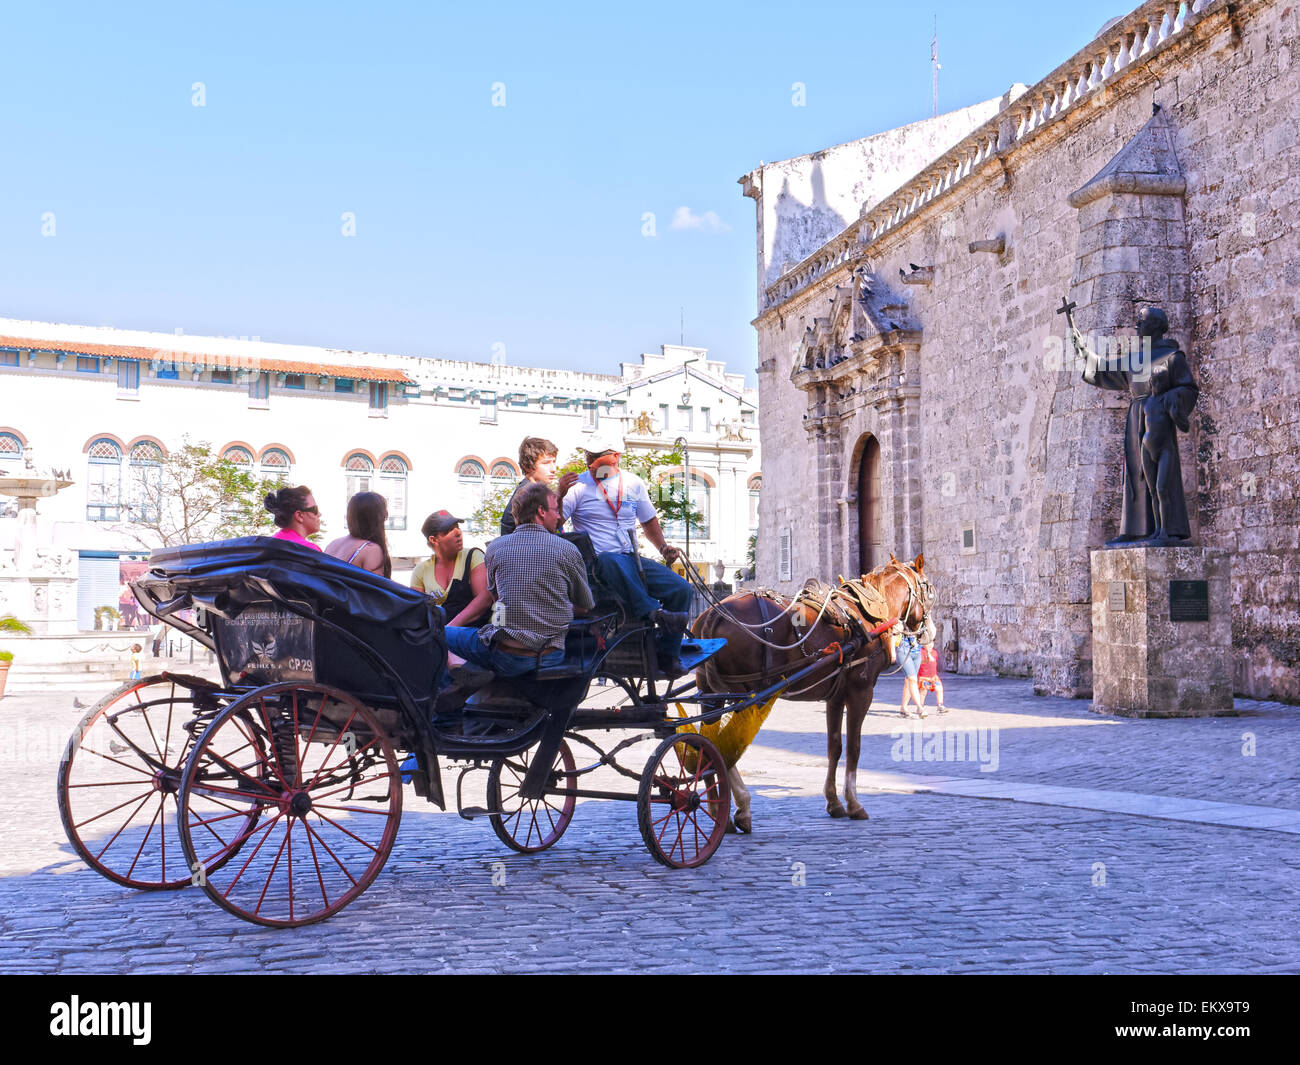 Horse and carriage tourist ride in Havana, Cuba Stock Photo